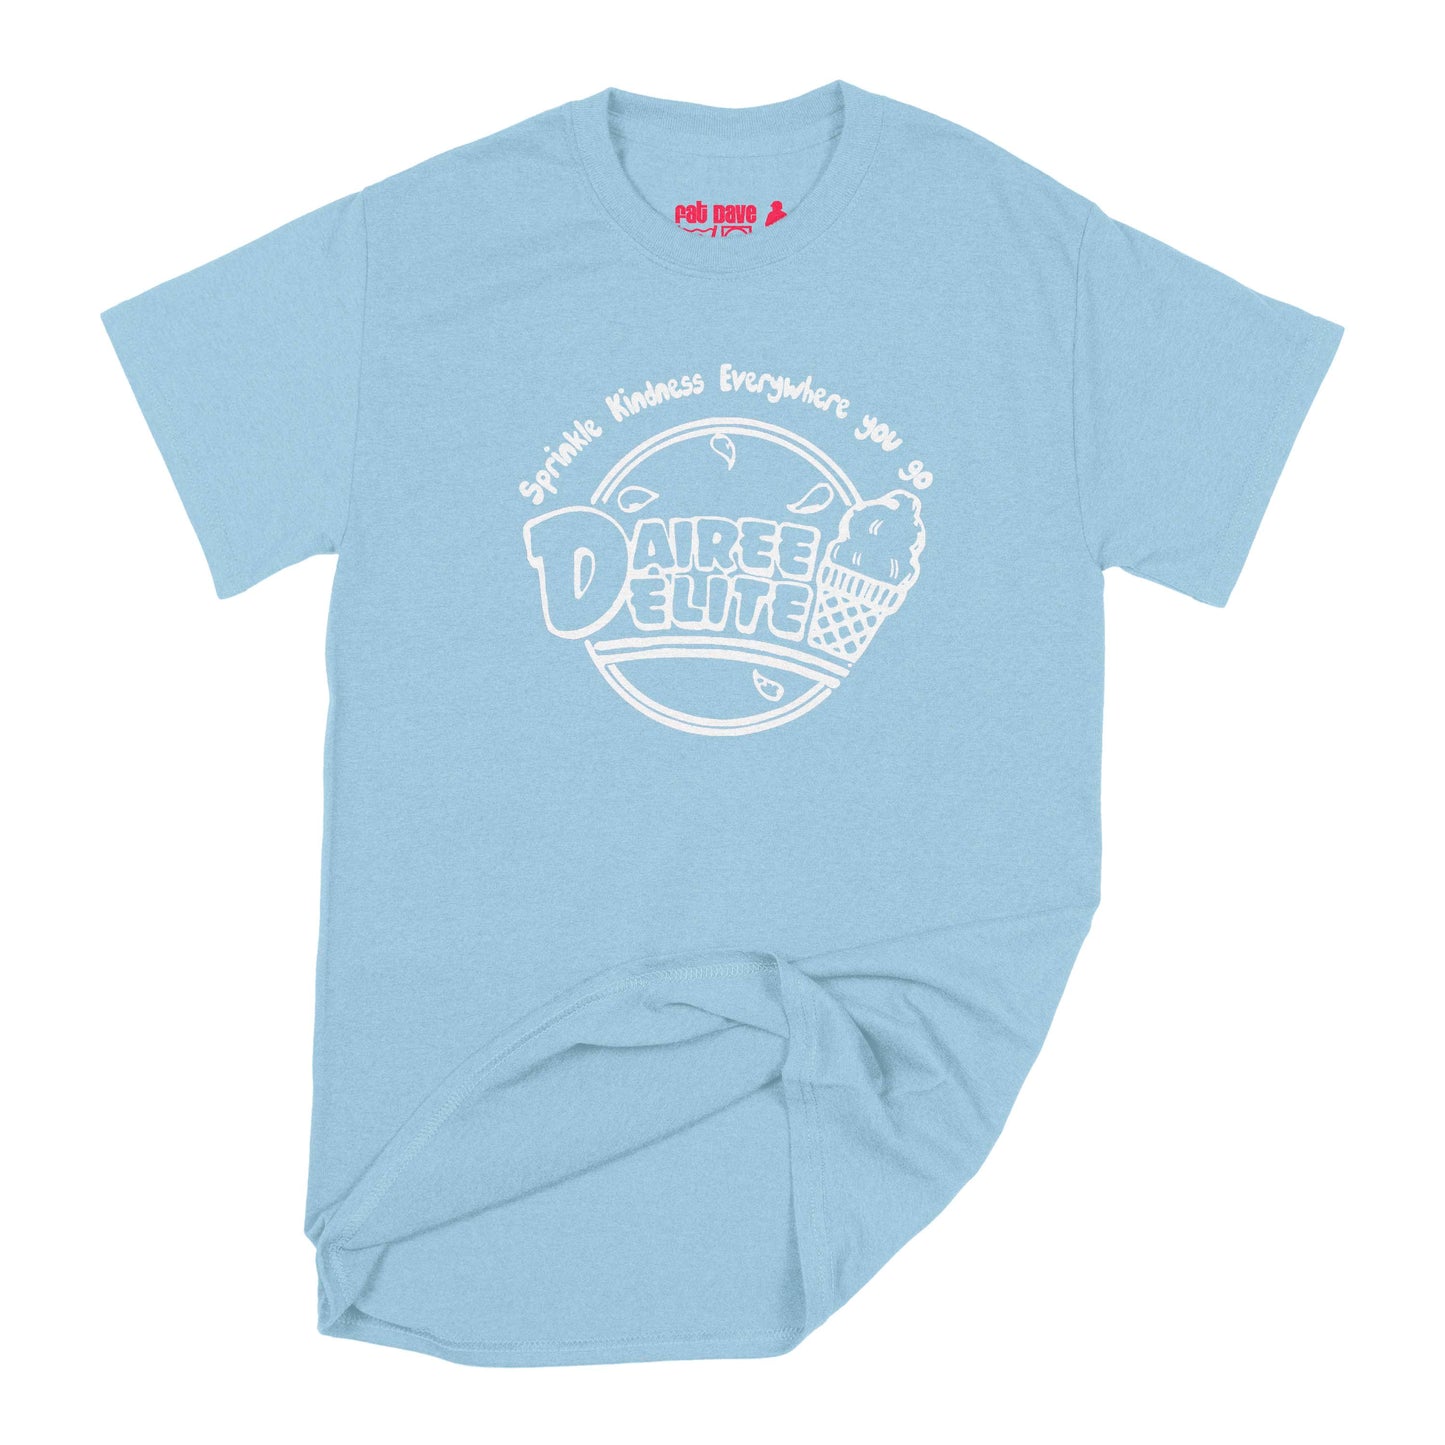 Dairee Delite 70th Anniversary Sprinkle Kindness T-Shirt Small Light Blue